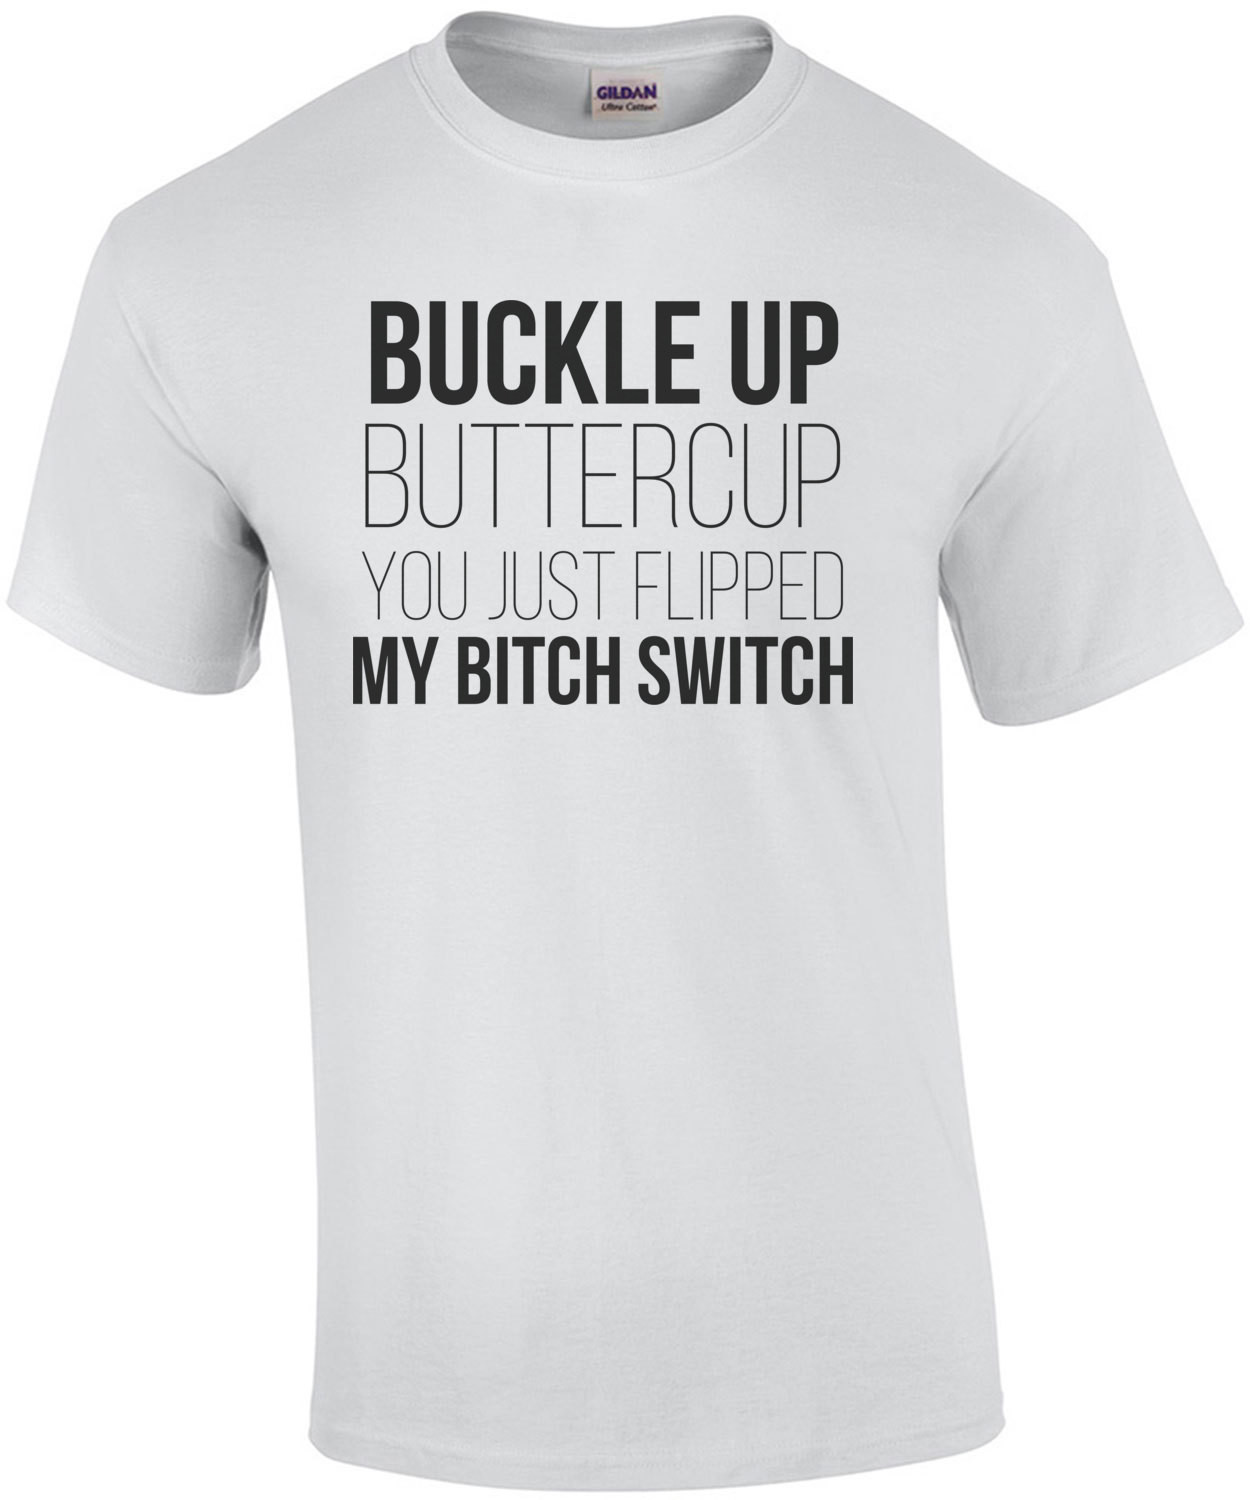 Buckle up buttercup you just flipped my bitchswitch - funny t-shirt